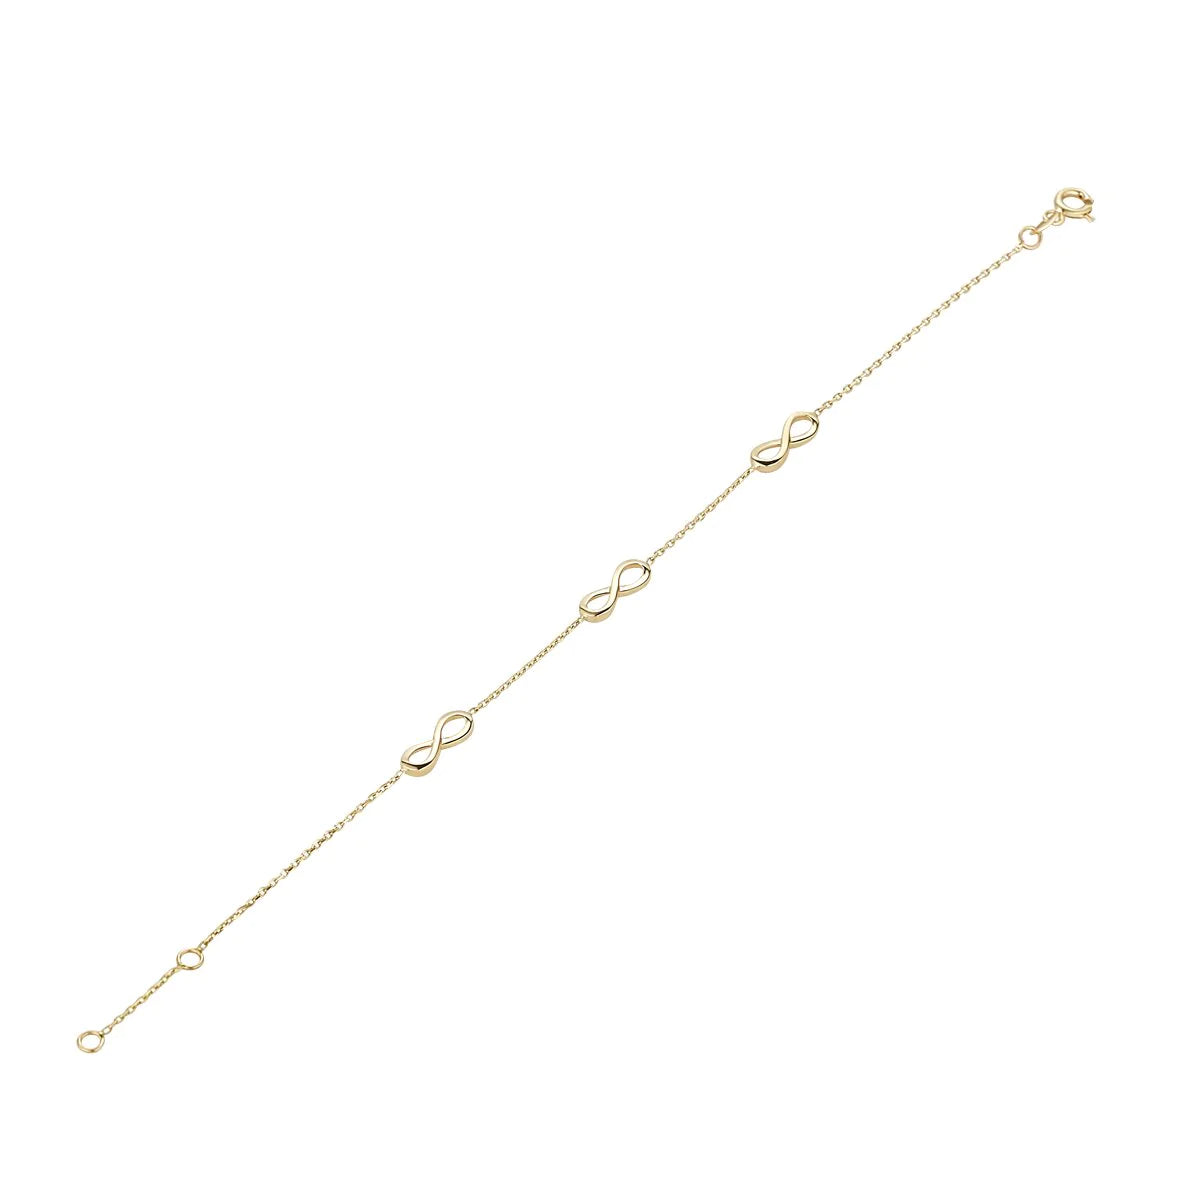 9ct Yellow Gold Delicate Infinity Trace Bracelet